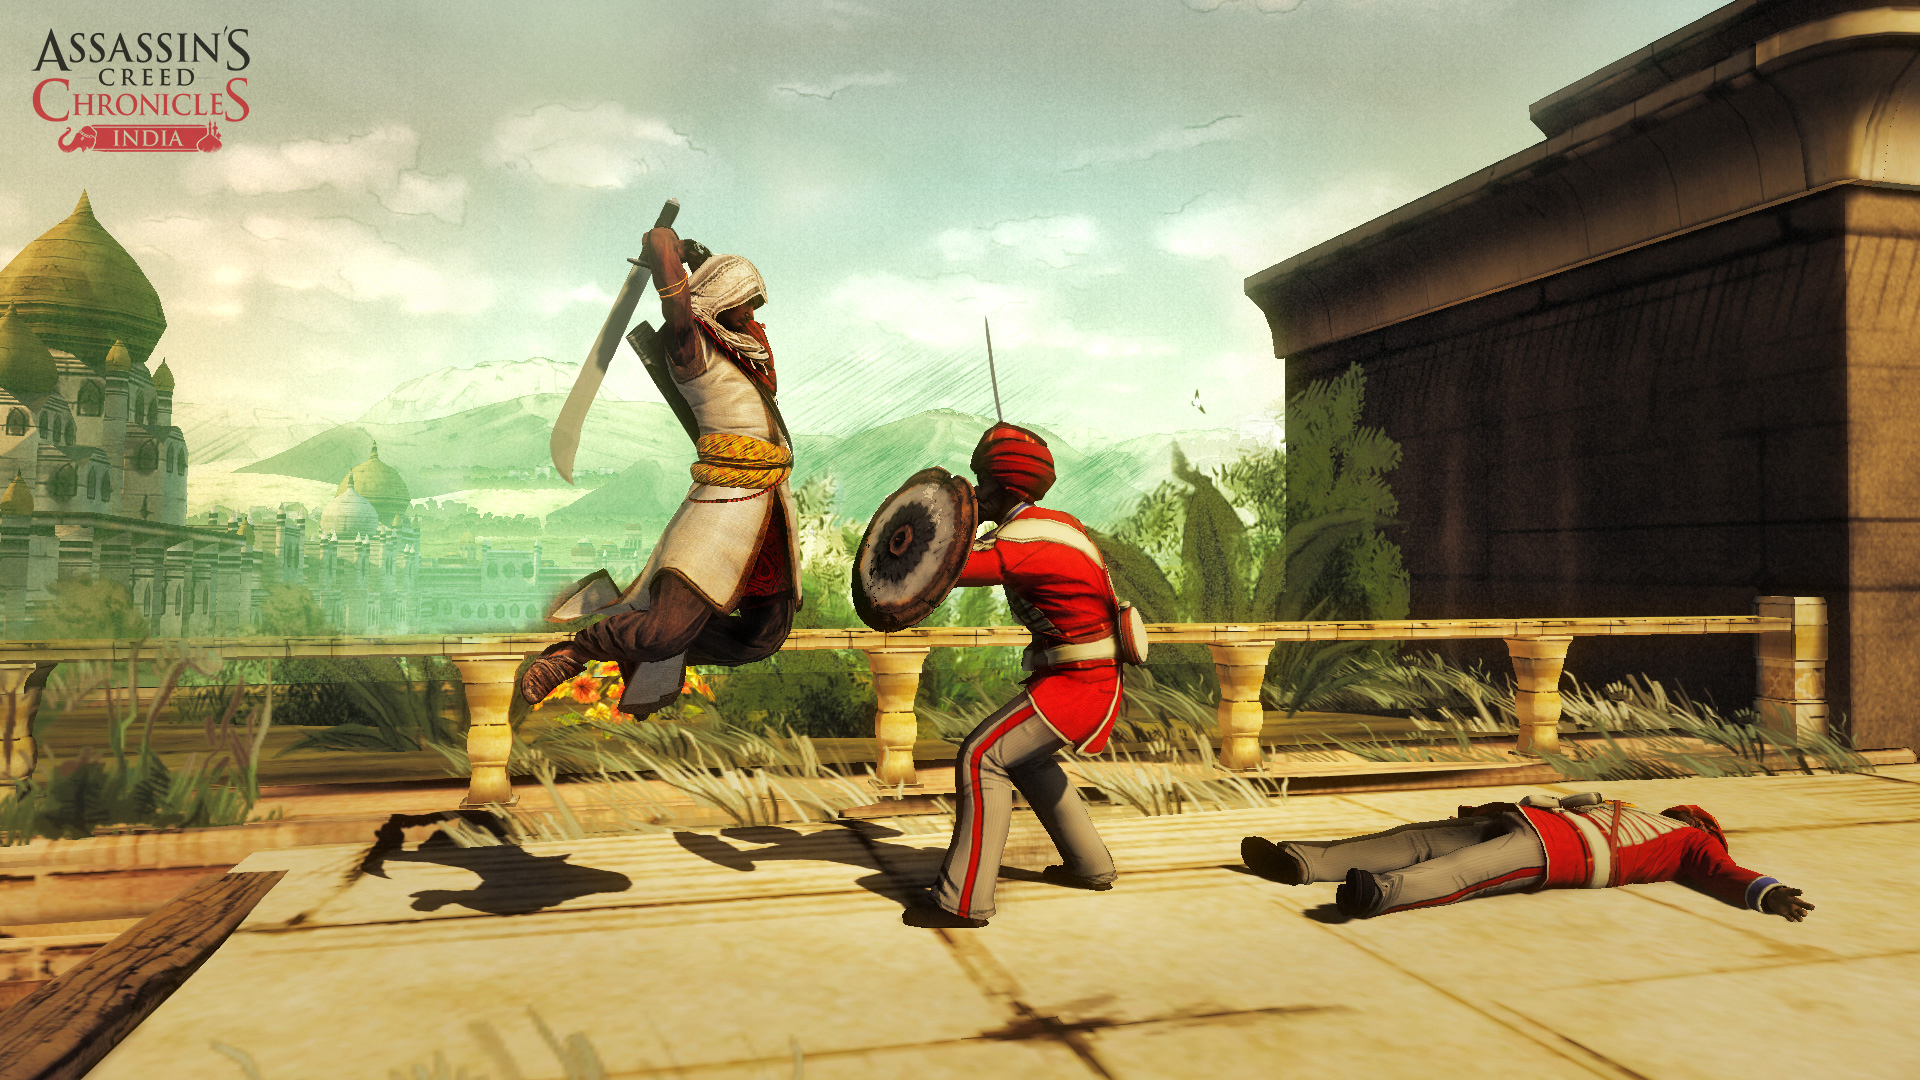 “Assassin’s Creed Chronicles” Visiting Russia and India in 2016 - A Bundle of the Three Games Will Also Be Available